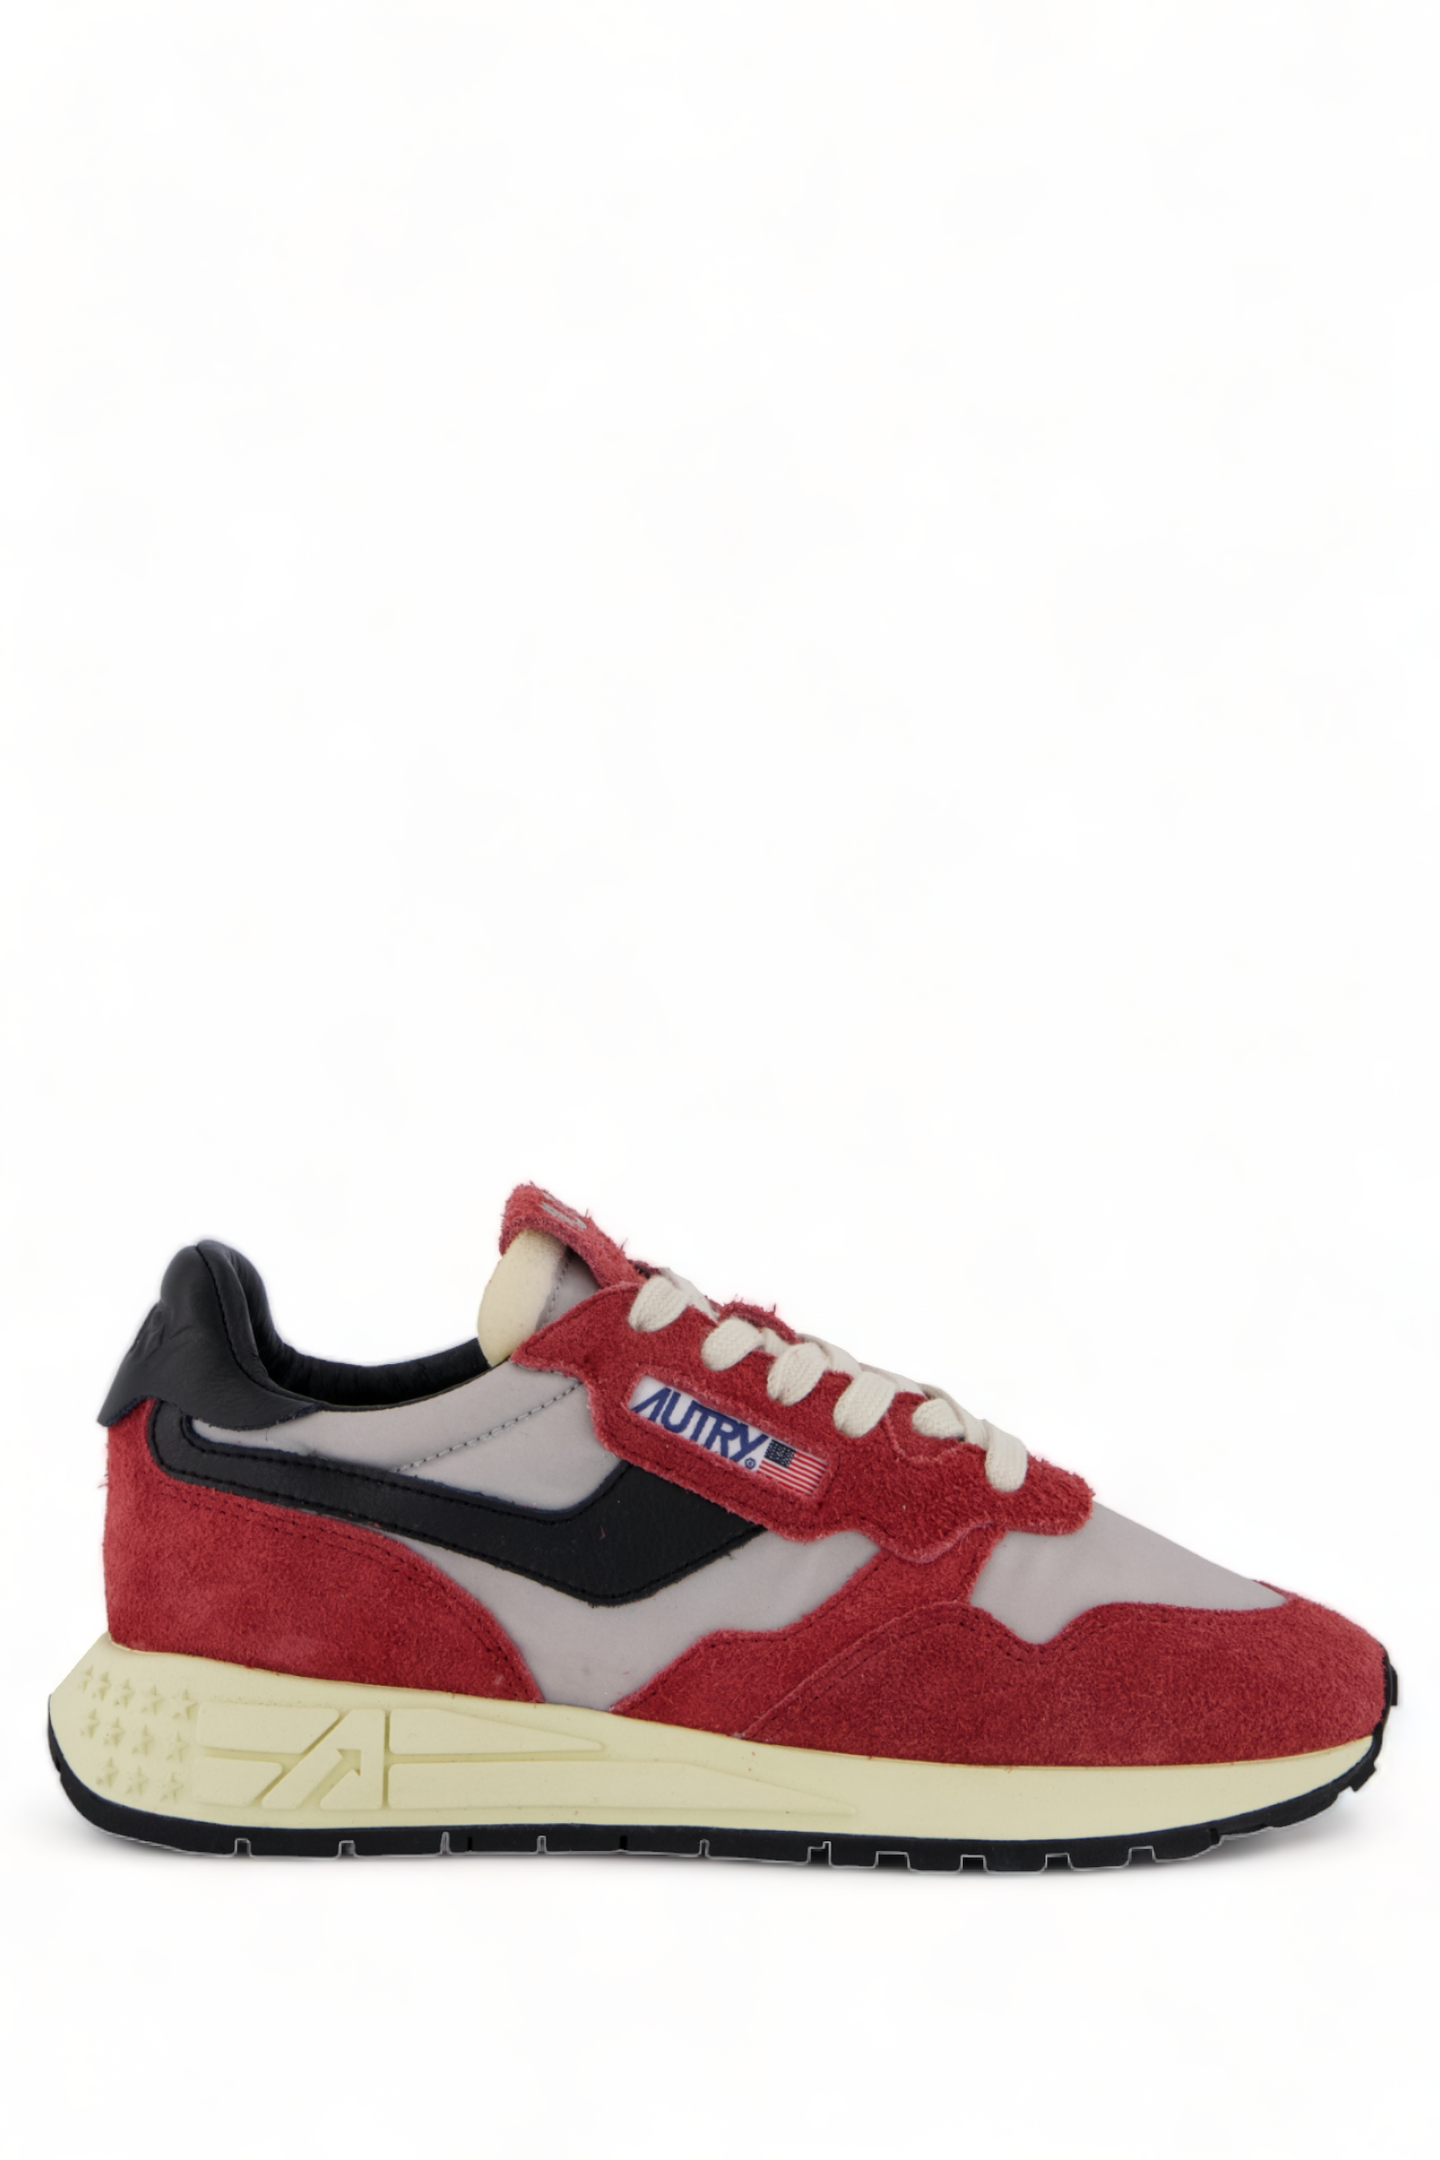 Autry Sneakers Reelwind Low Nylon Red HN07